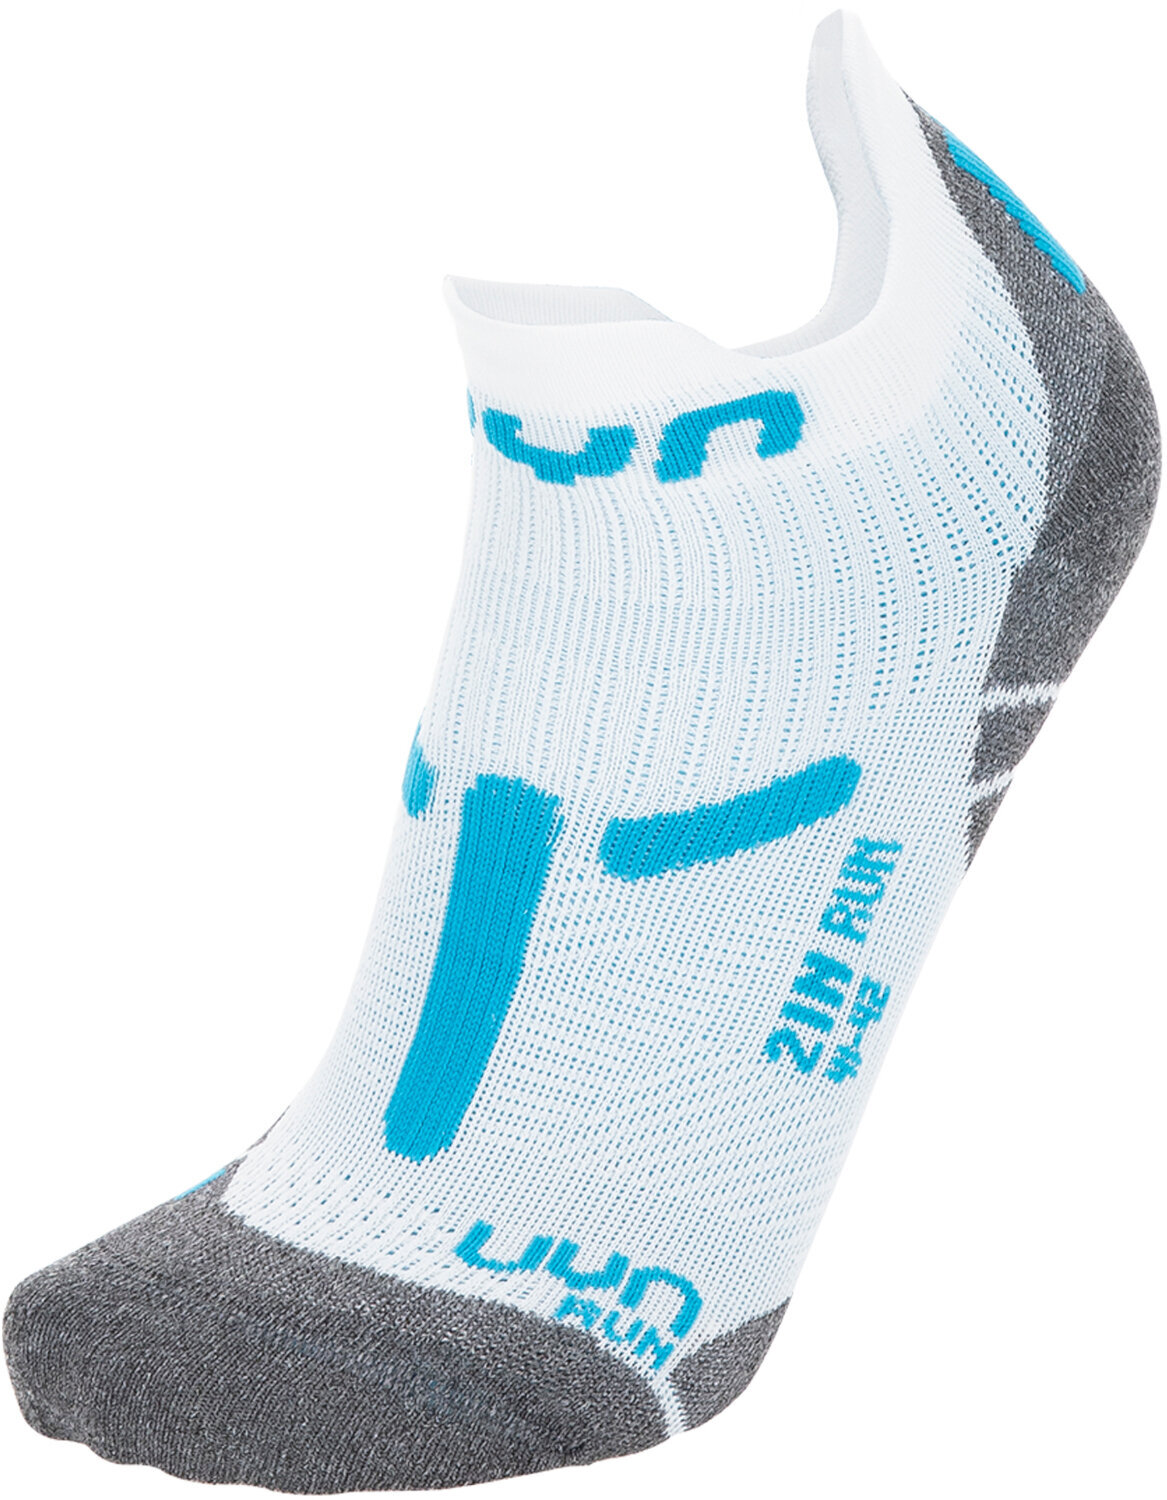 Chaussettes de course
 UYN Run 2in Turquoise-Blanc 37/38 Chaussettes de course